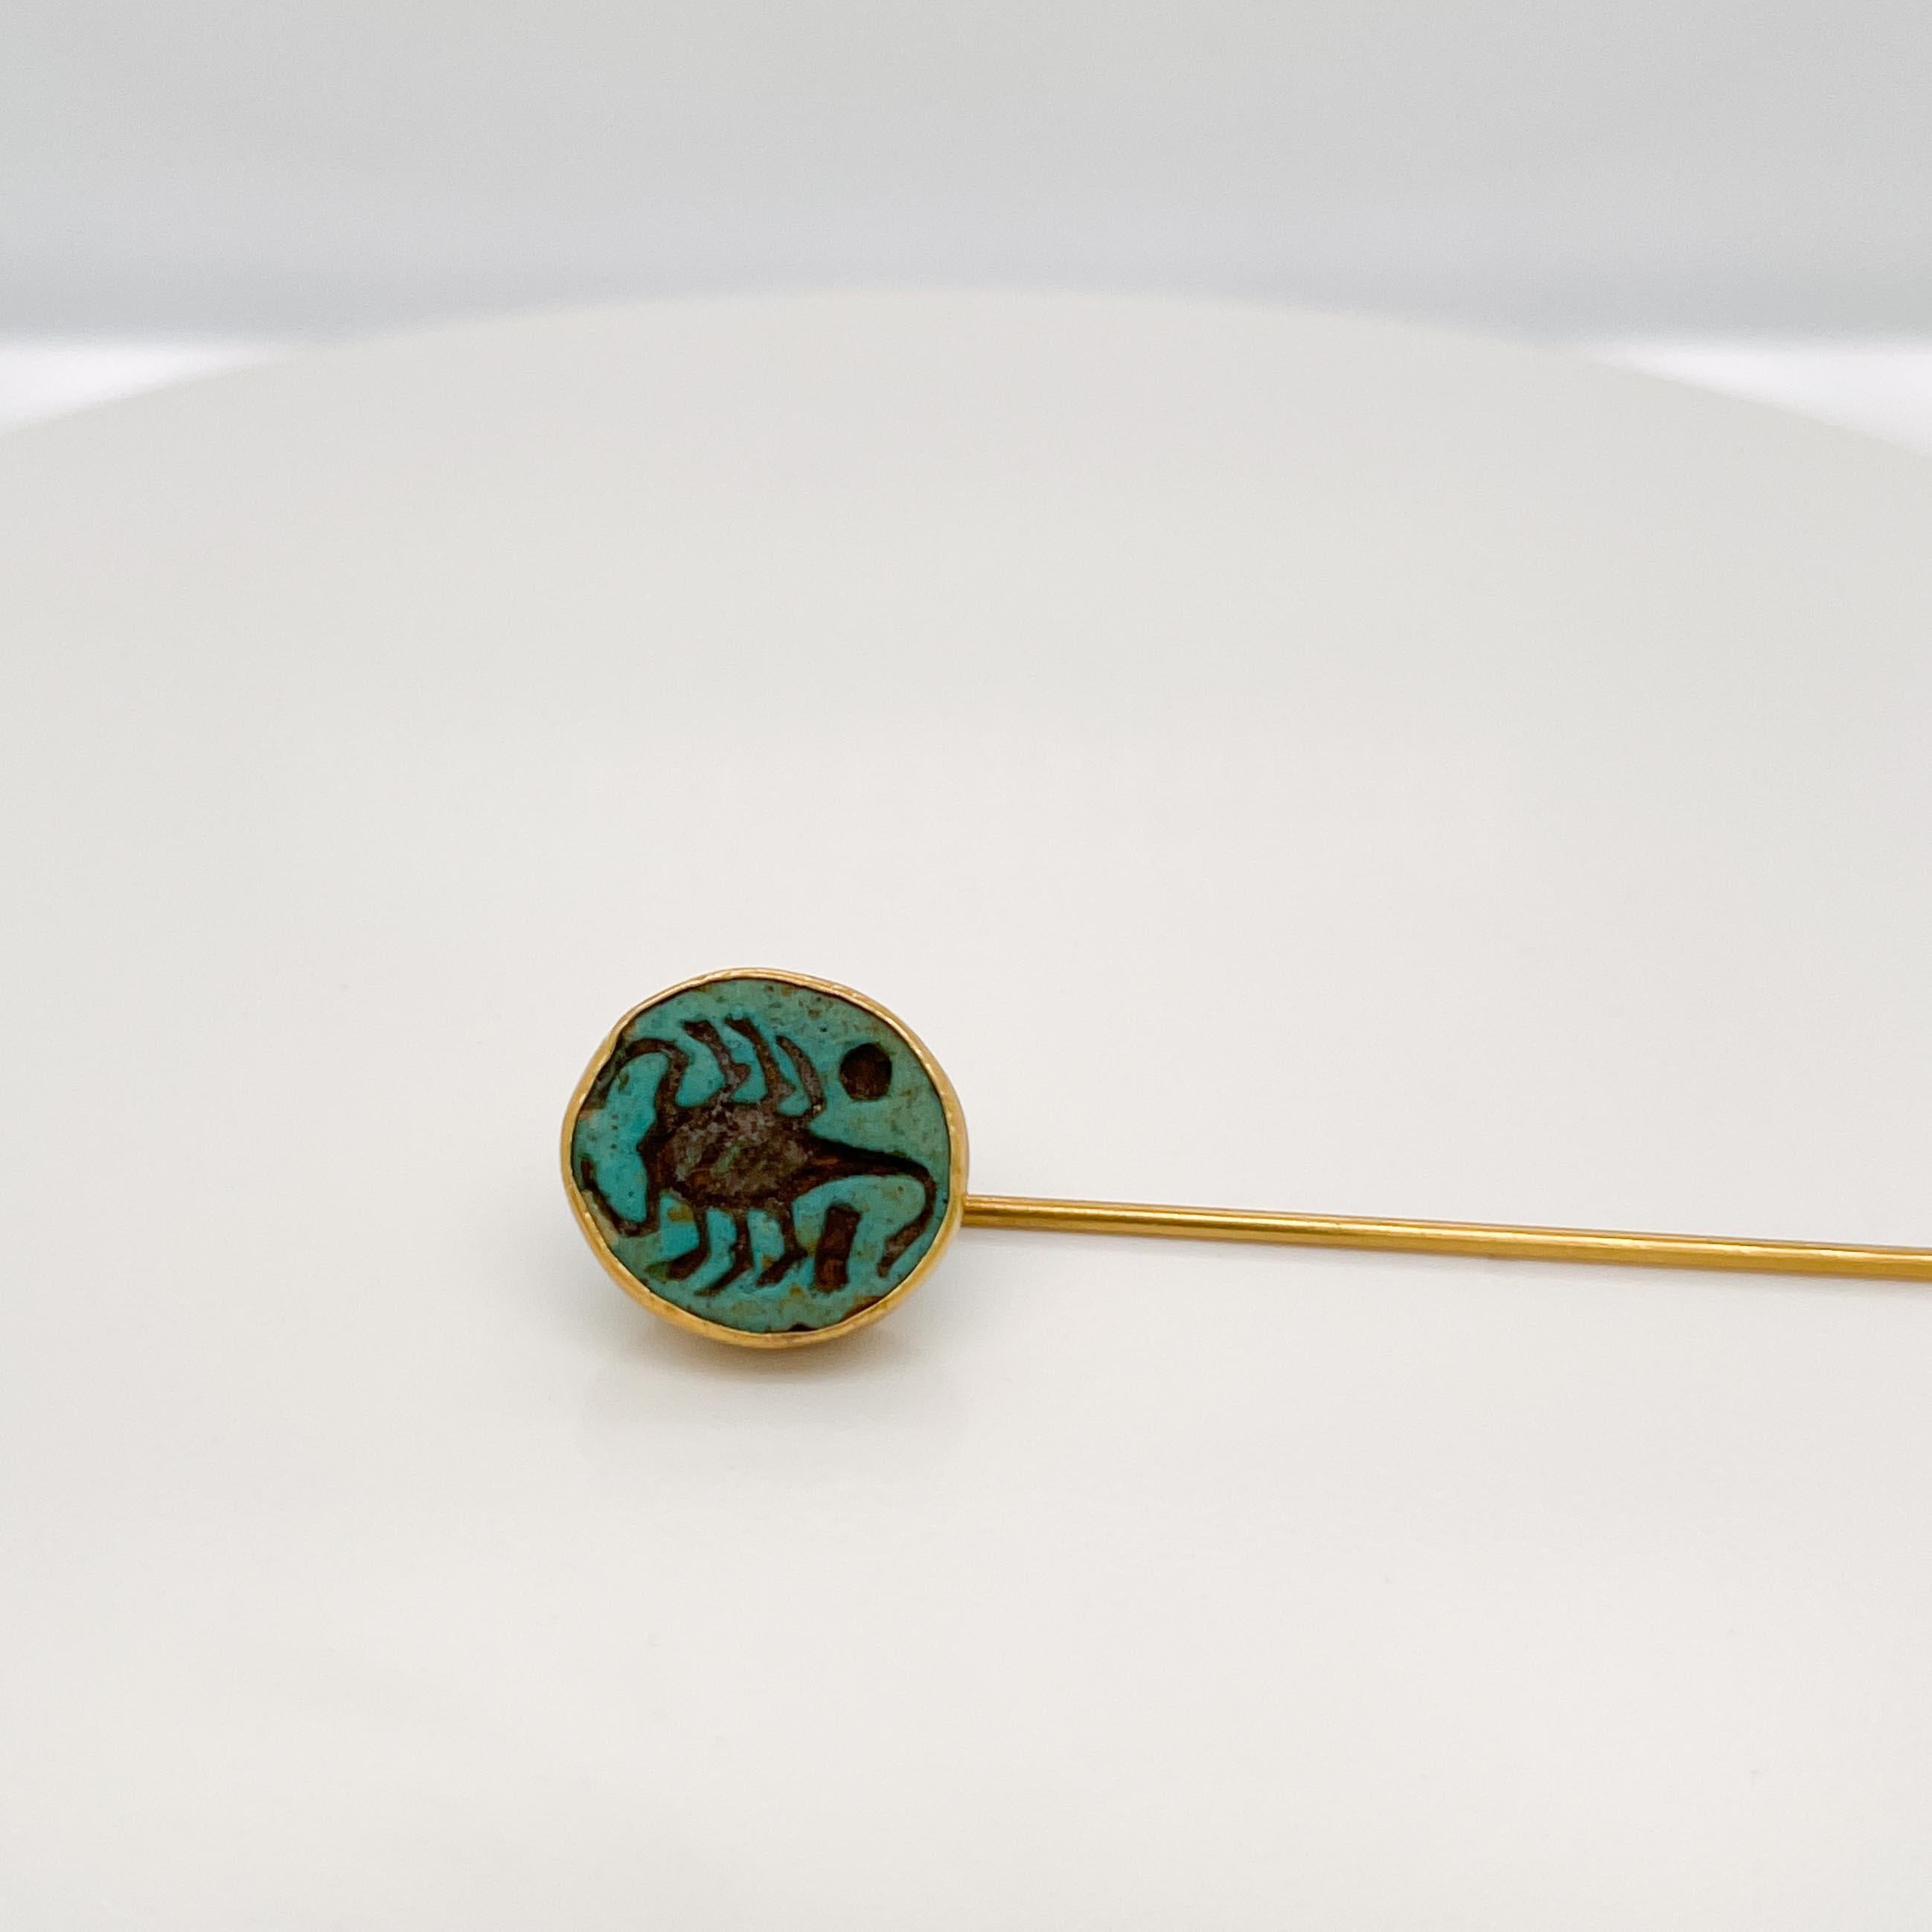 Antique Egyptian Revival 14K Gold & Faience Scorpion Stick Pin 1